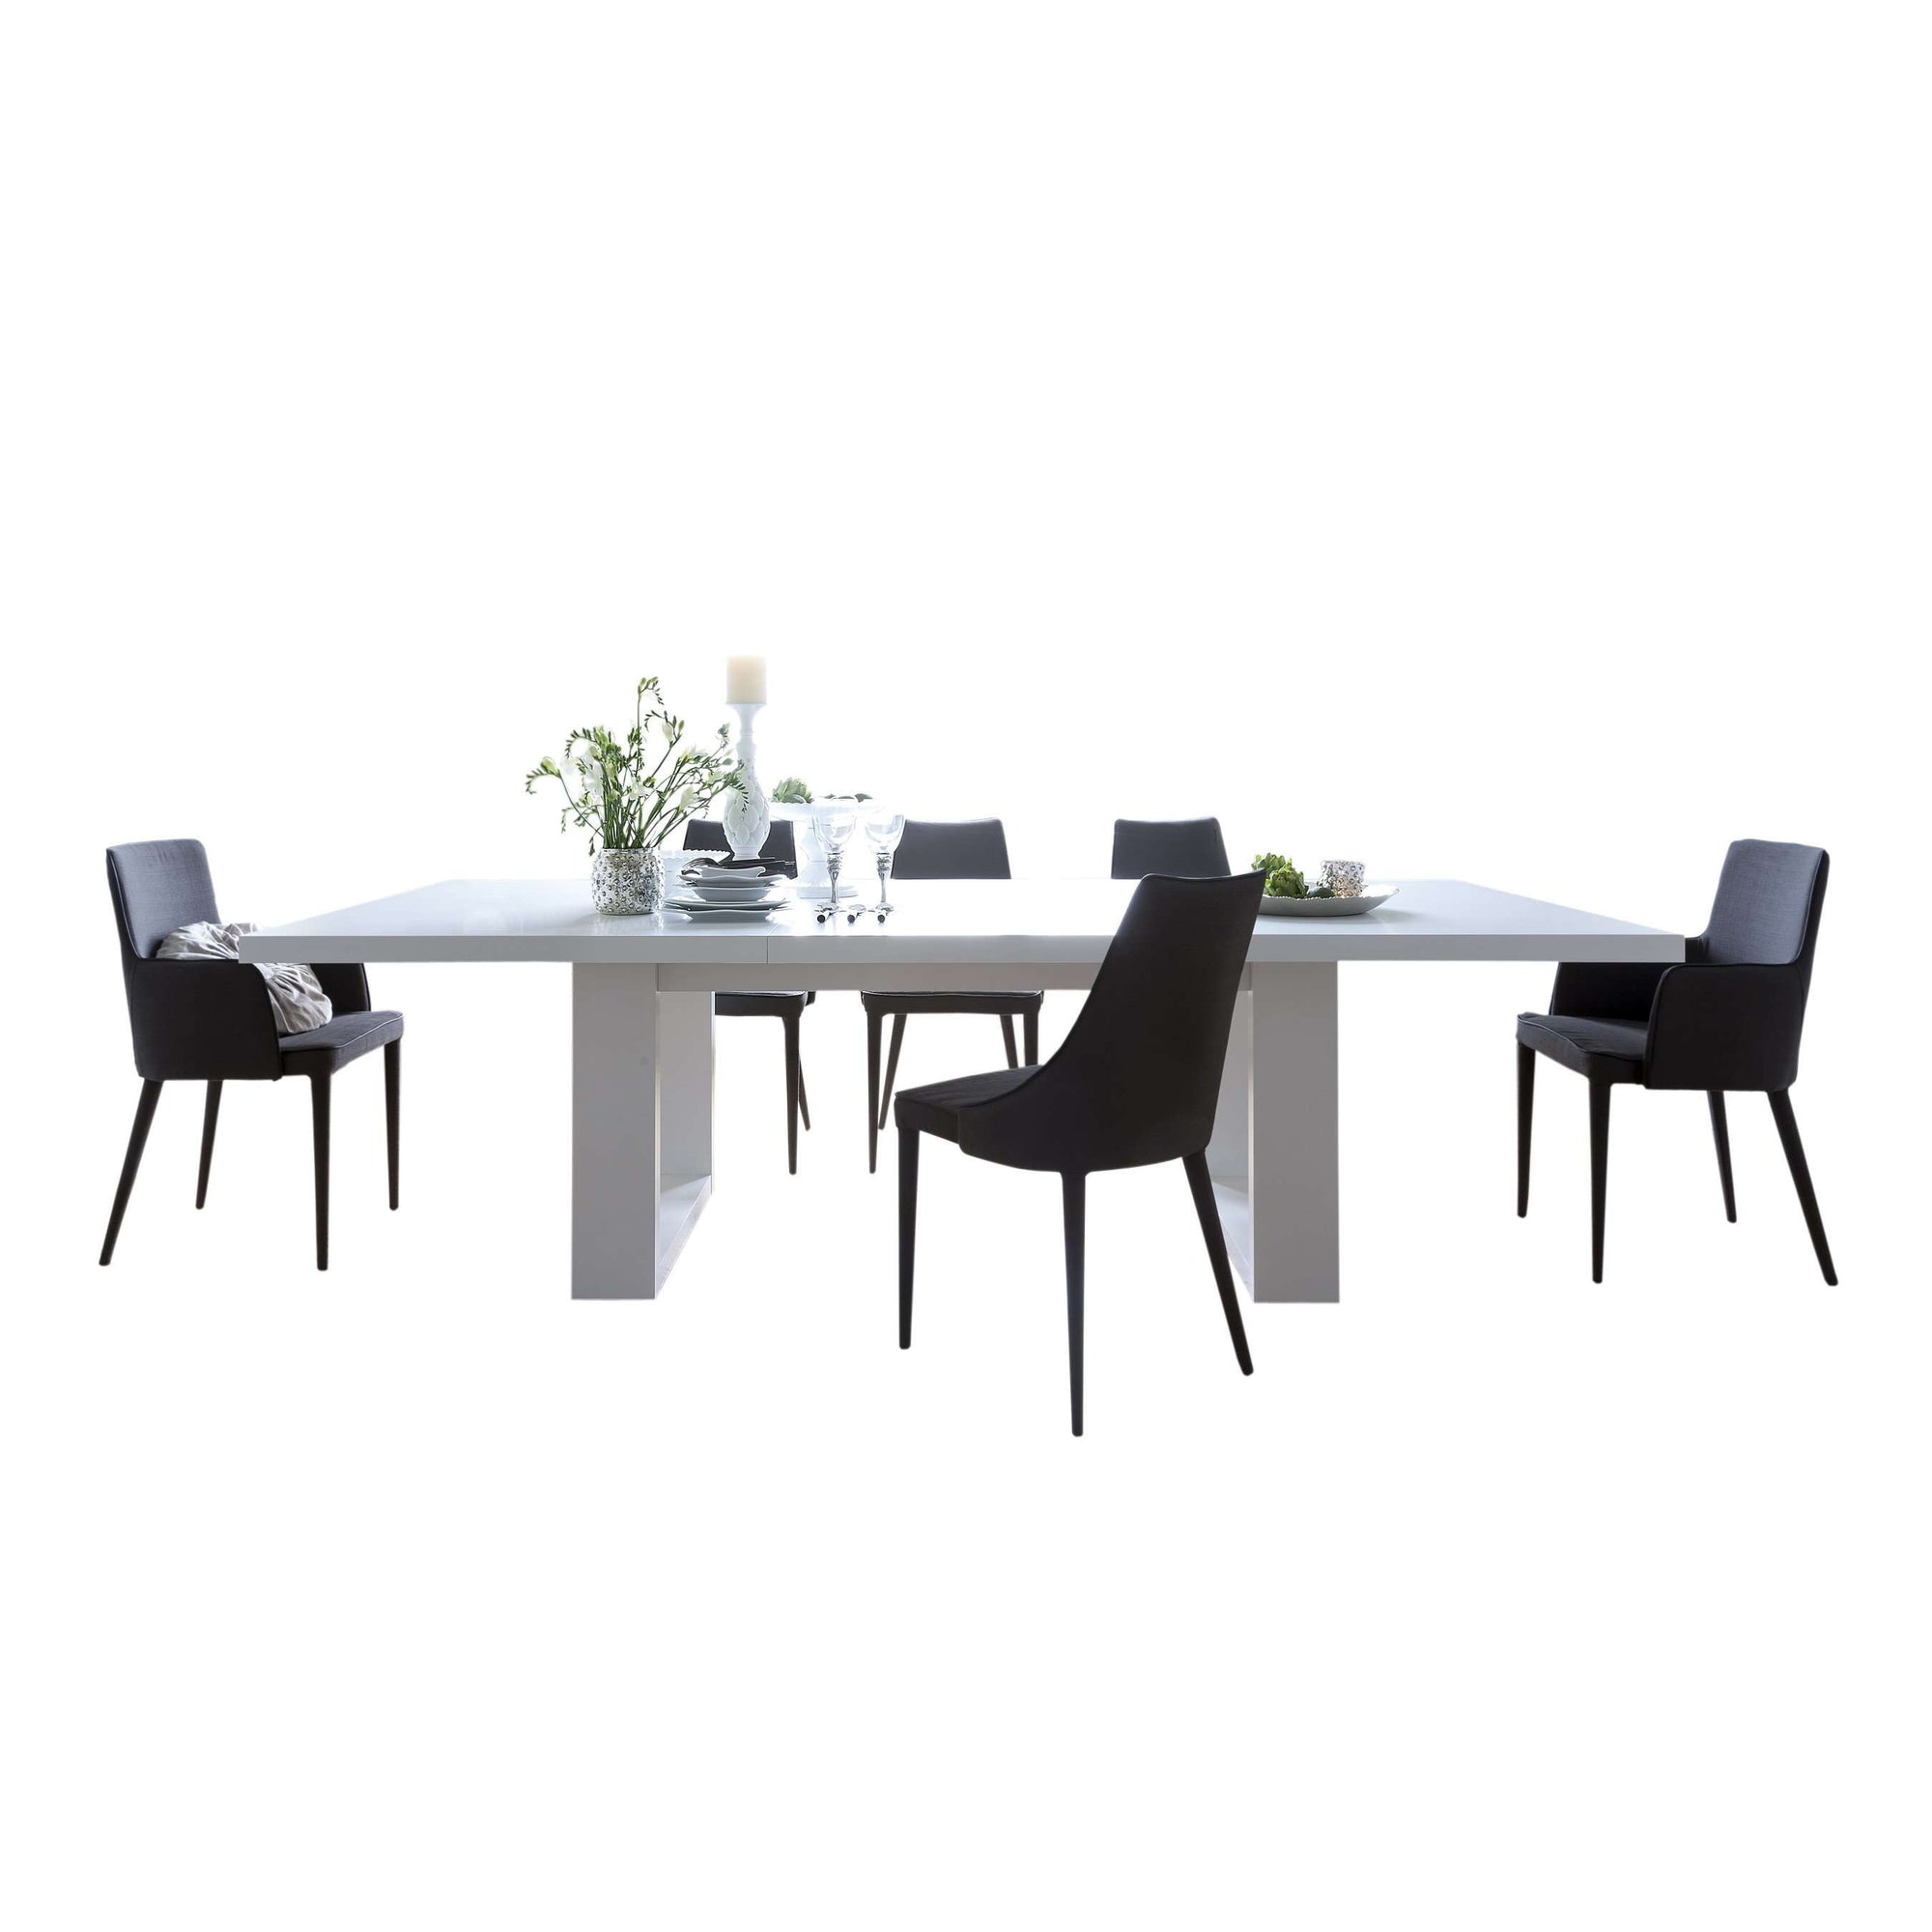 Tema Home-Tundra 79" Extendible Dining Table w/ Extension 056040-TUNDRA79E-Dining Table-MODTEMPO